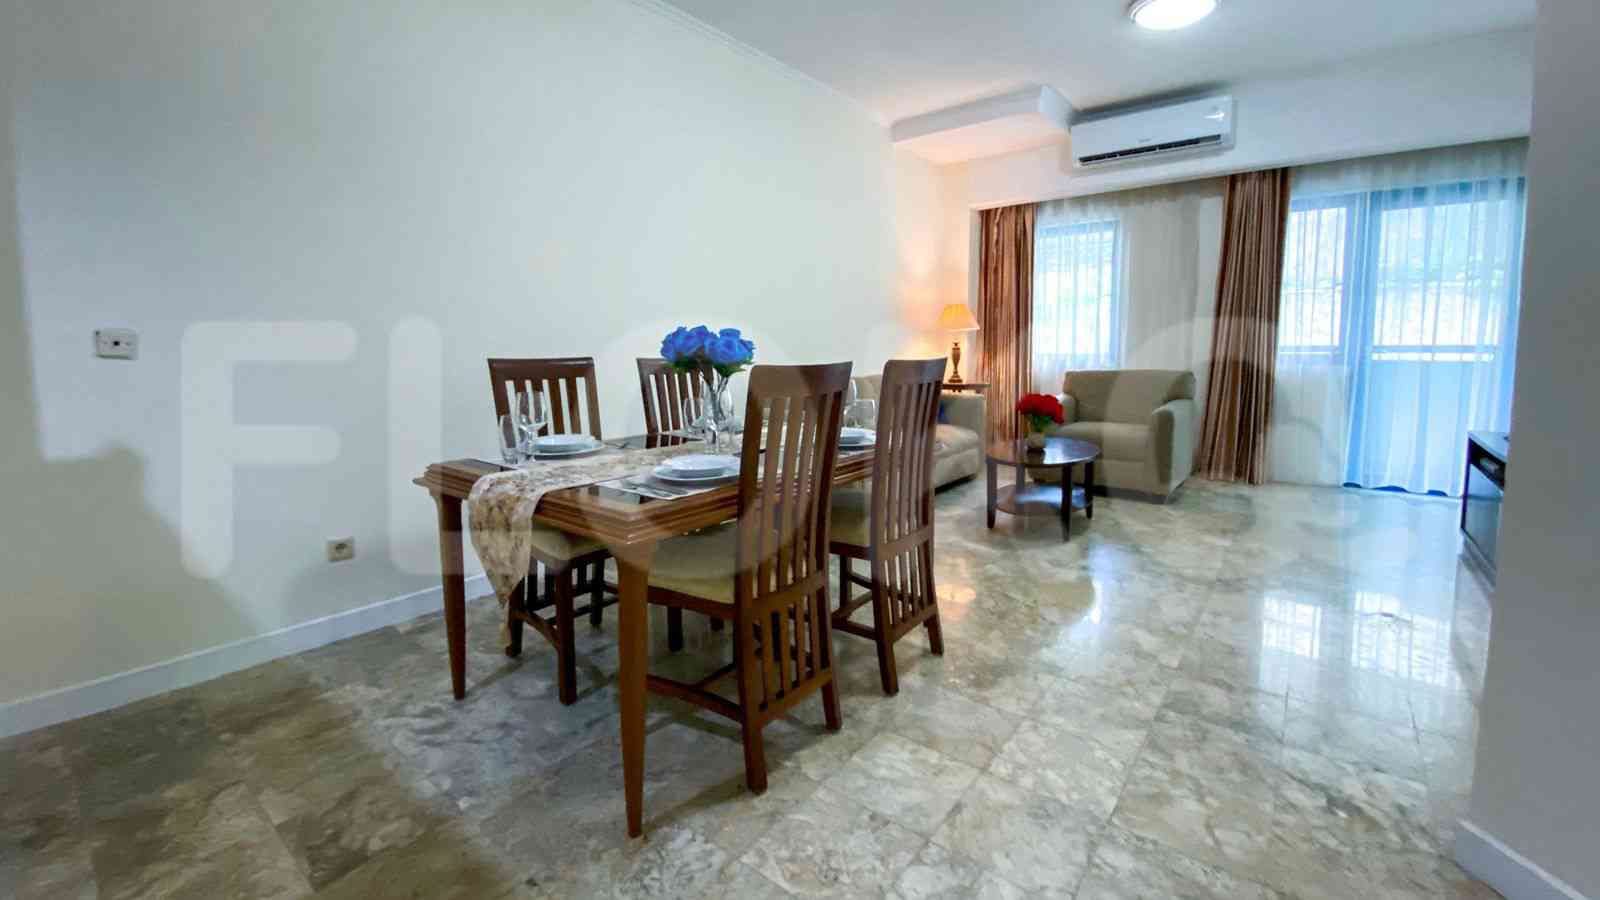 2 Bedroom on 2nd Floor for Rent in Kemang Apartment by Pudjiadi Prestige - fke6bf 7